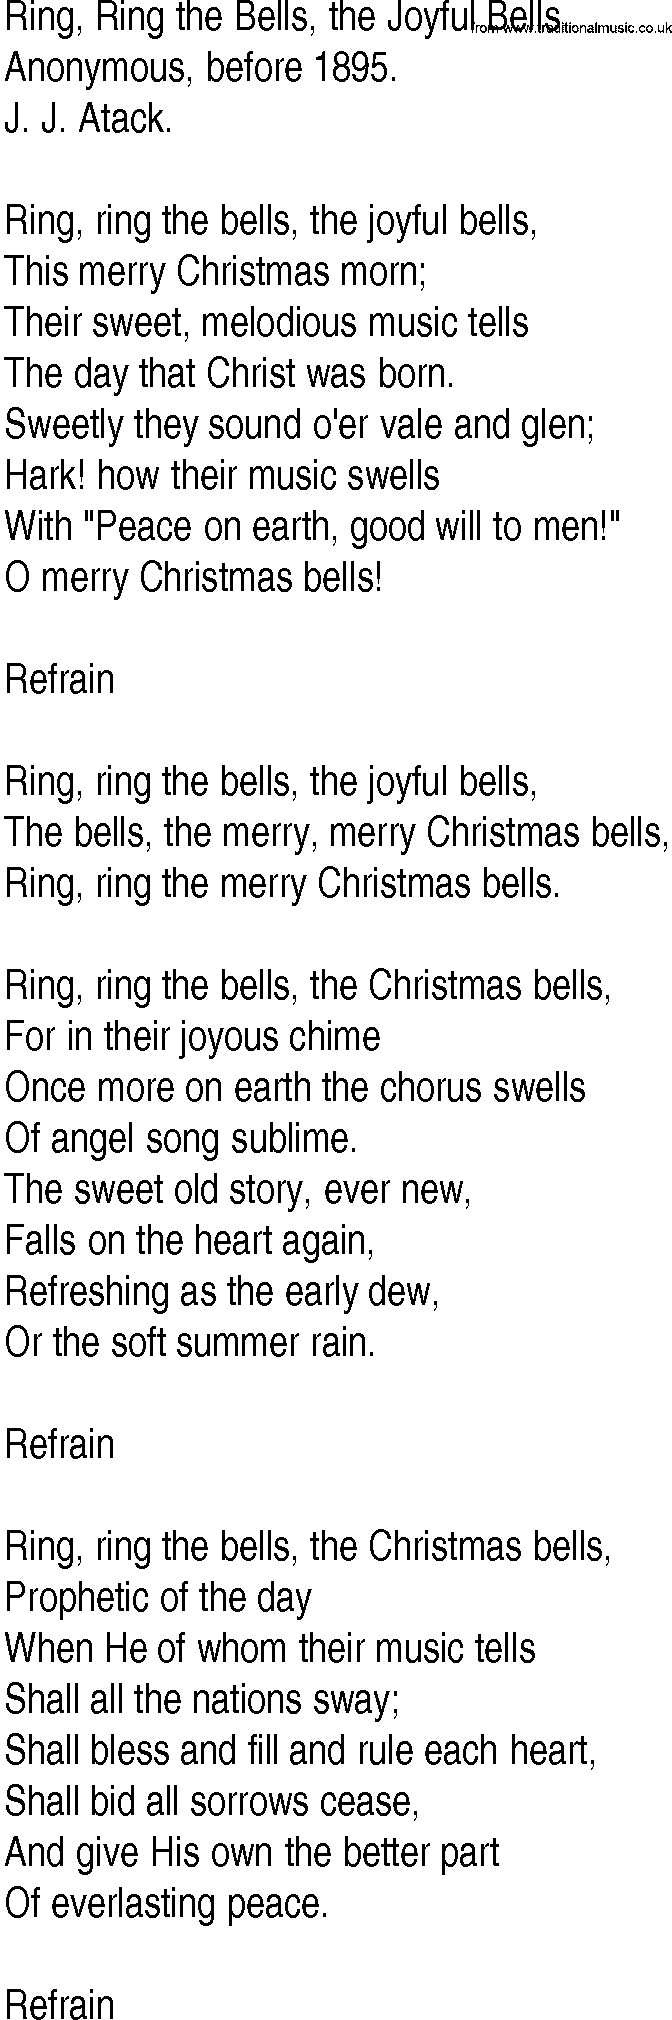 Hymn and Gospel Song: Ring, Ring the Bells, the Joyful Bells by Anonymous before lyrics